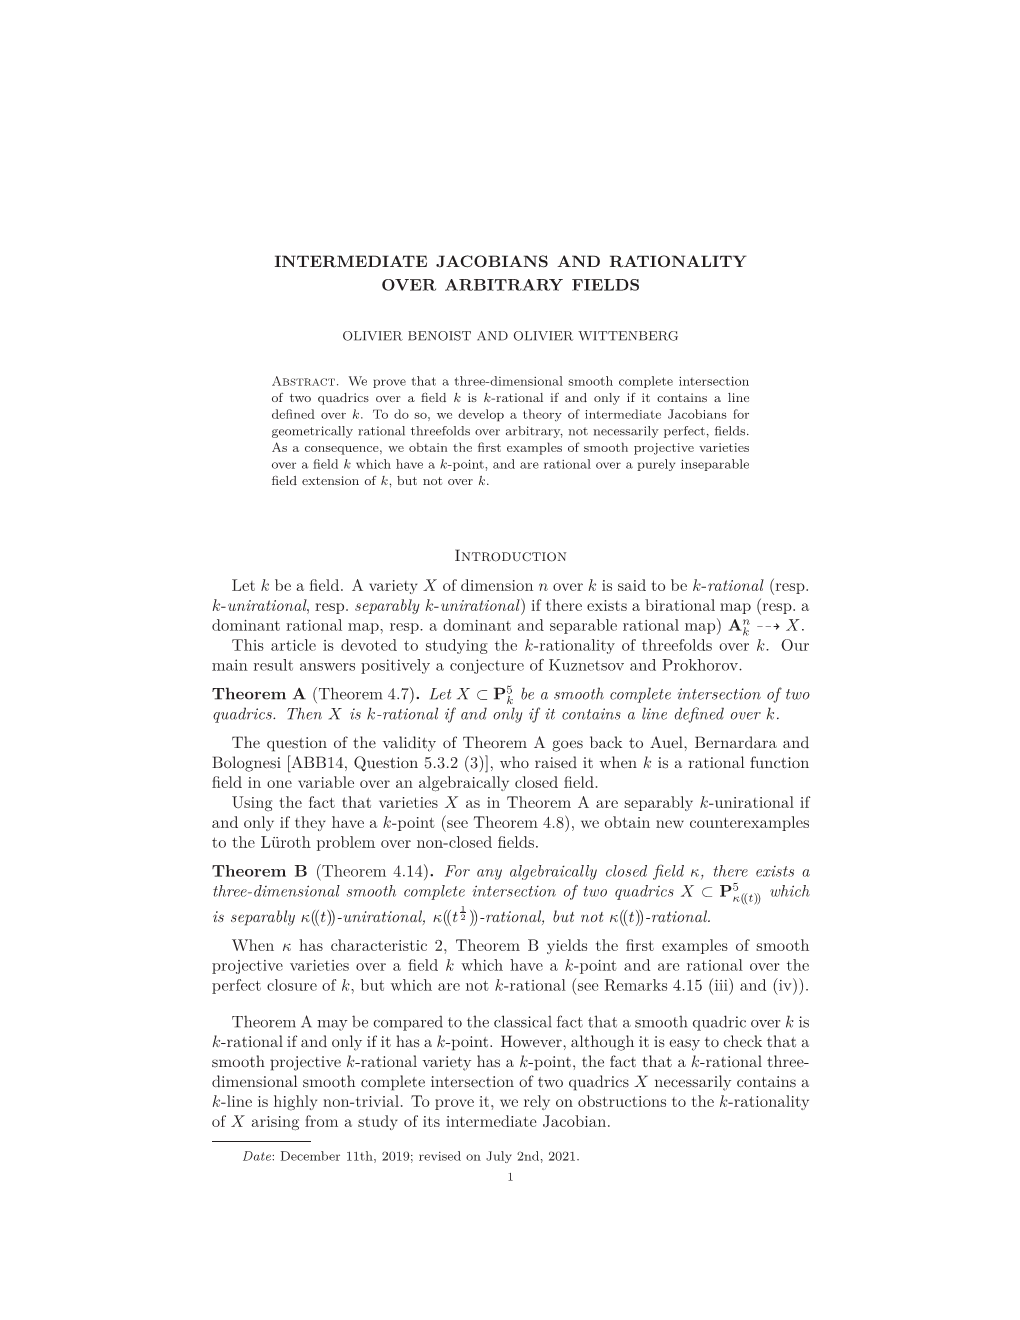 Intermediate Jacobians and Rationality Over Arbitrary Fields